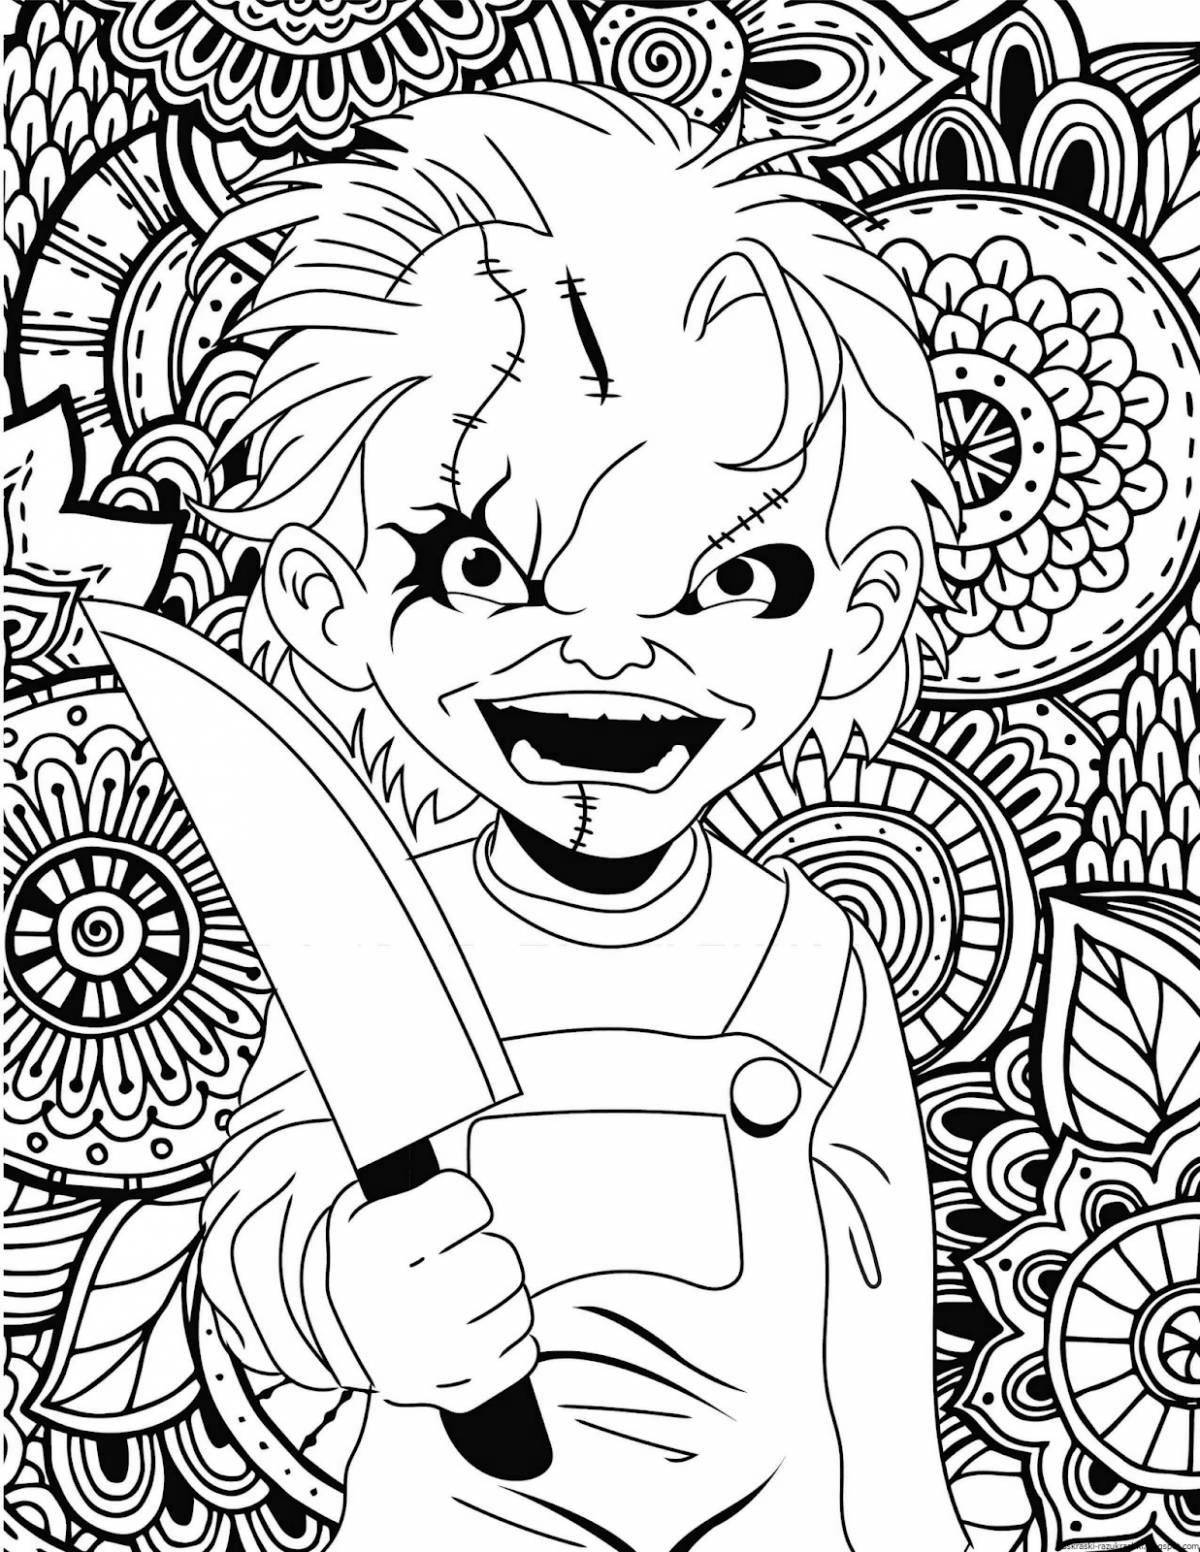 Color-frenzy coloring page noneto